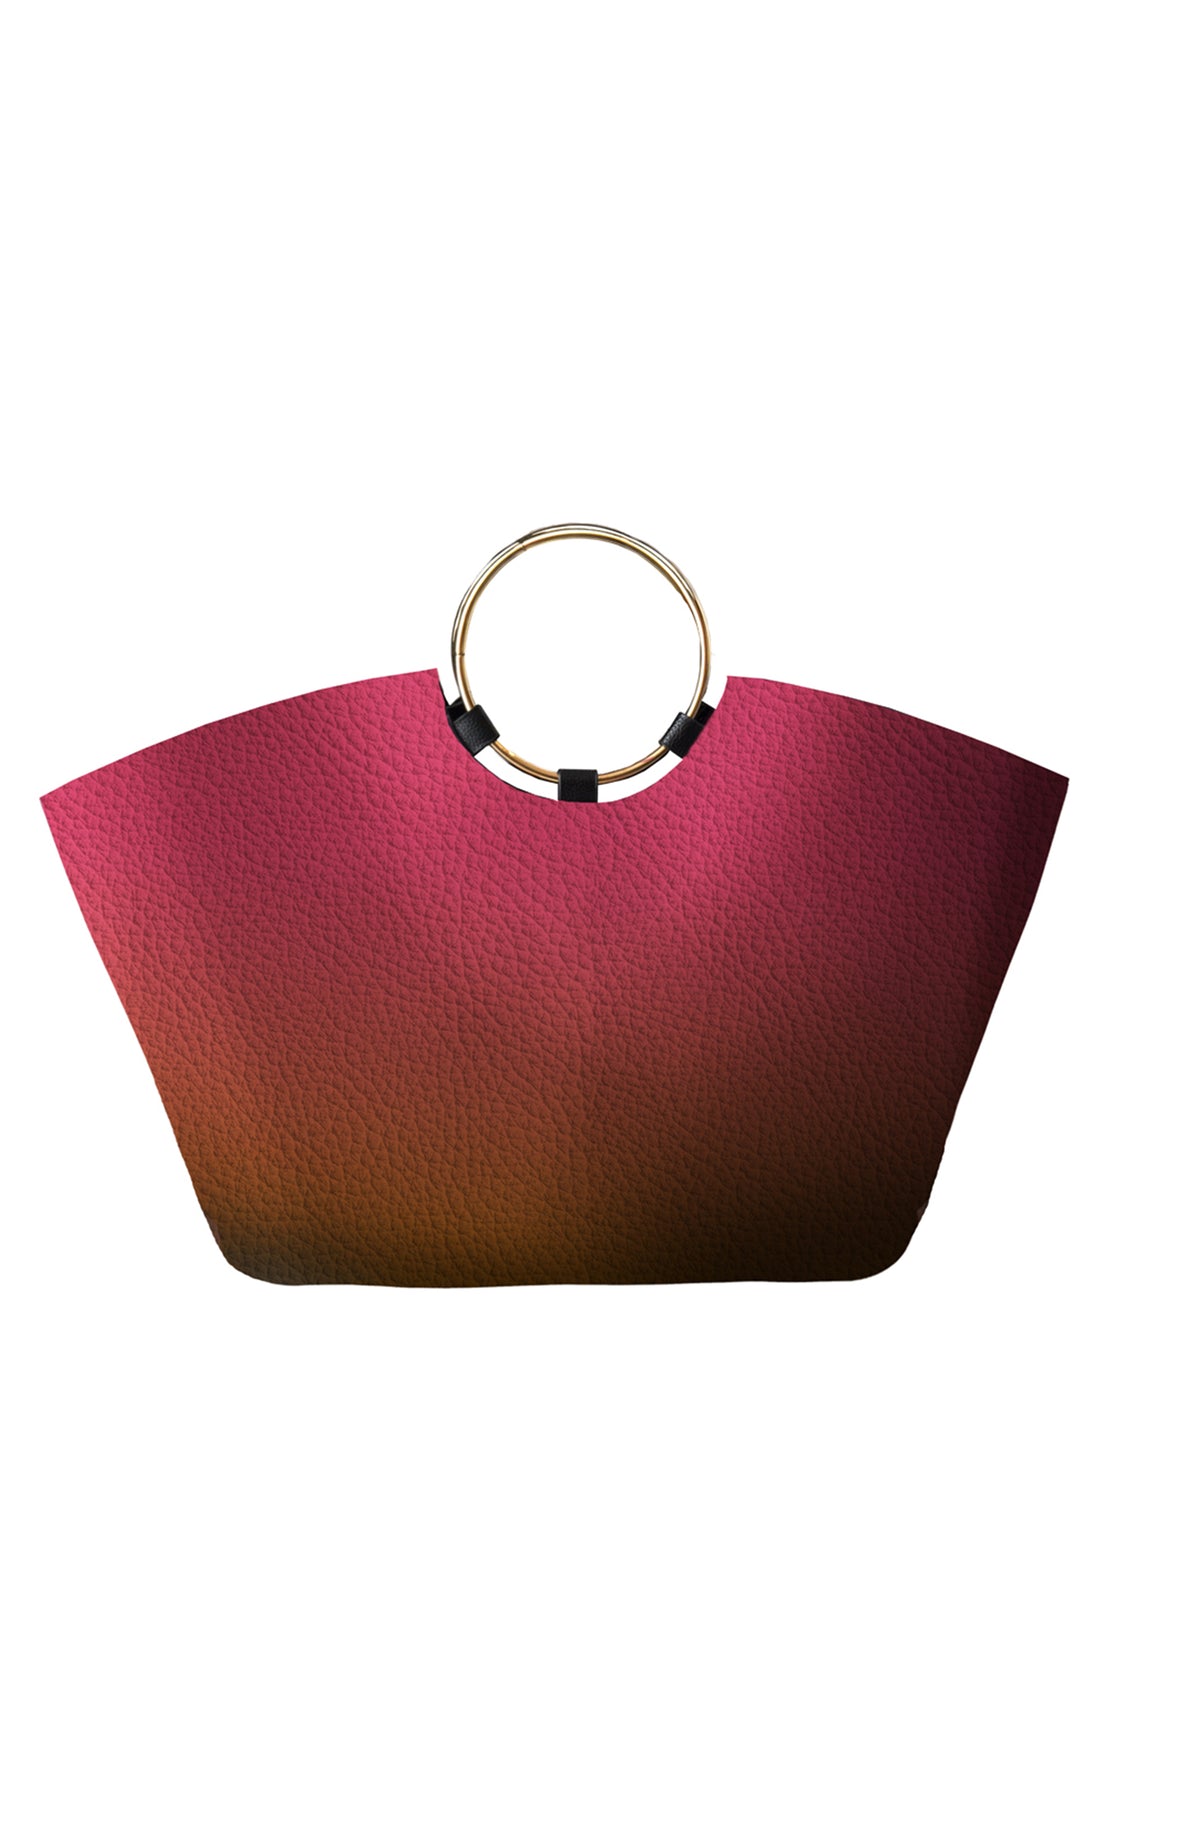 COOP OH YEAH TOTE - PINK OMBRE